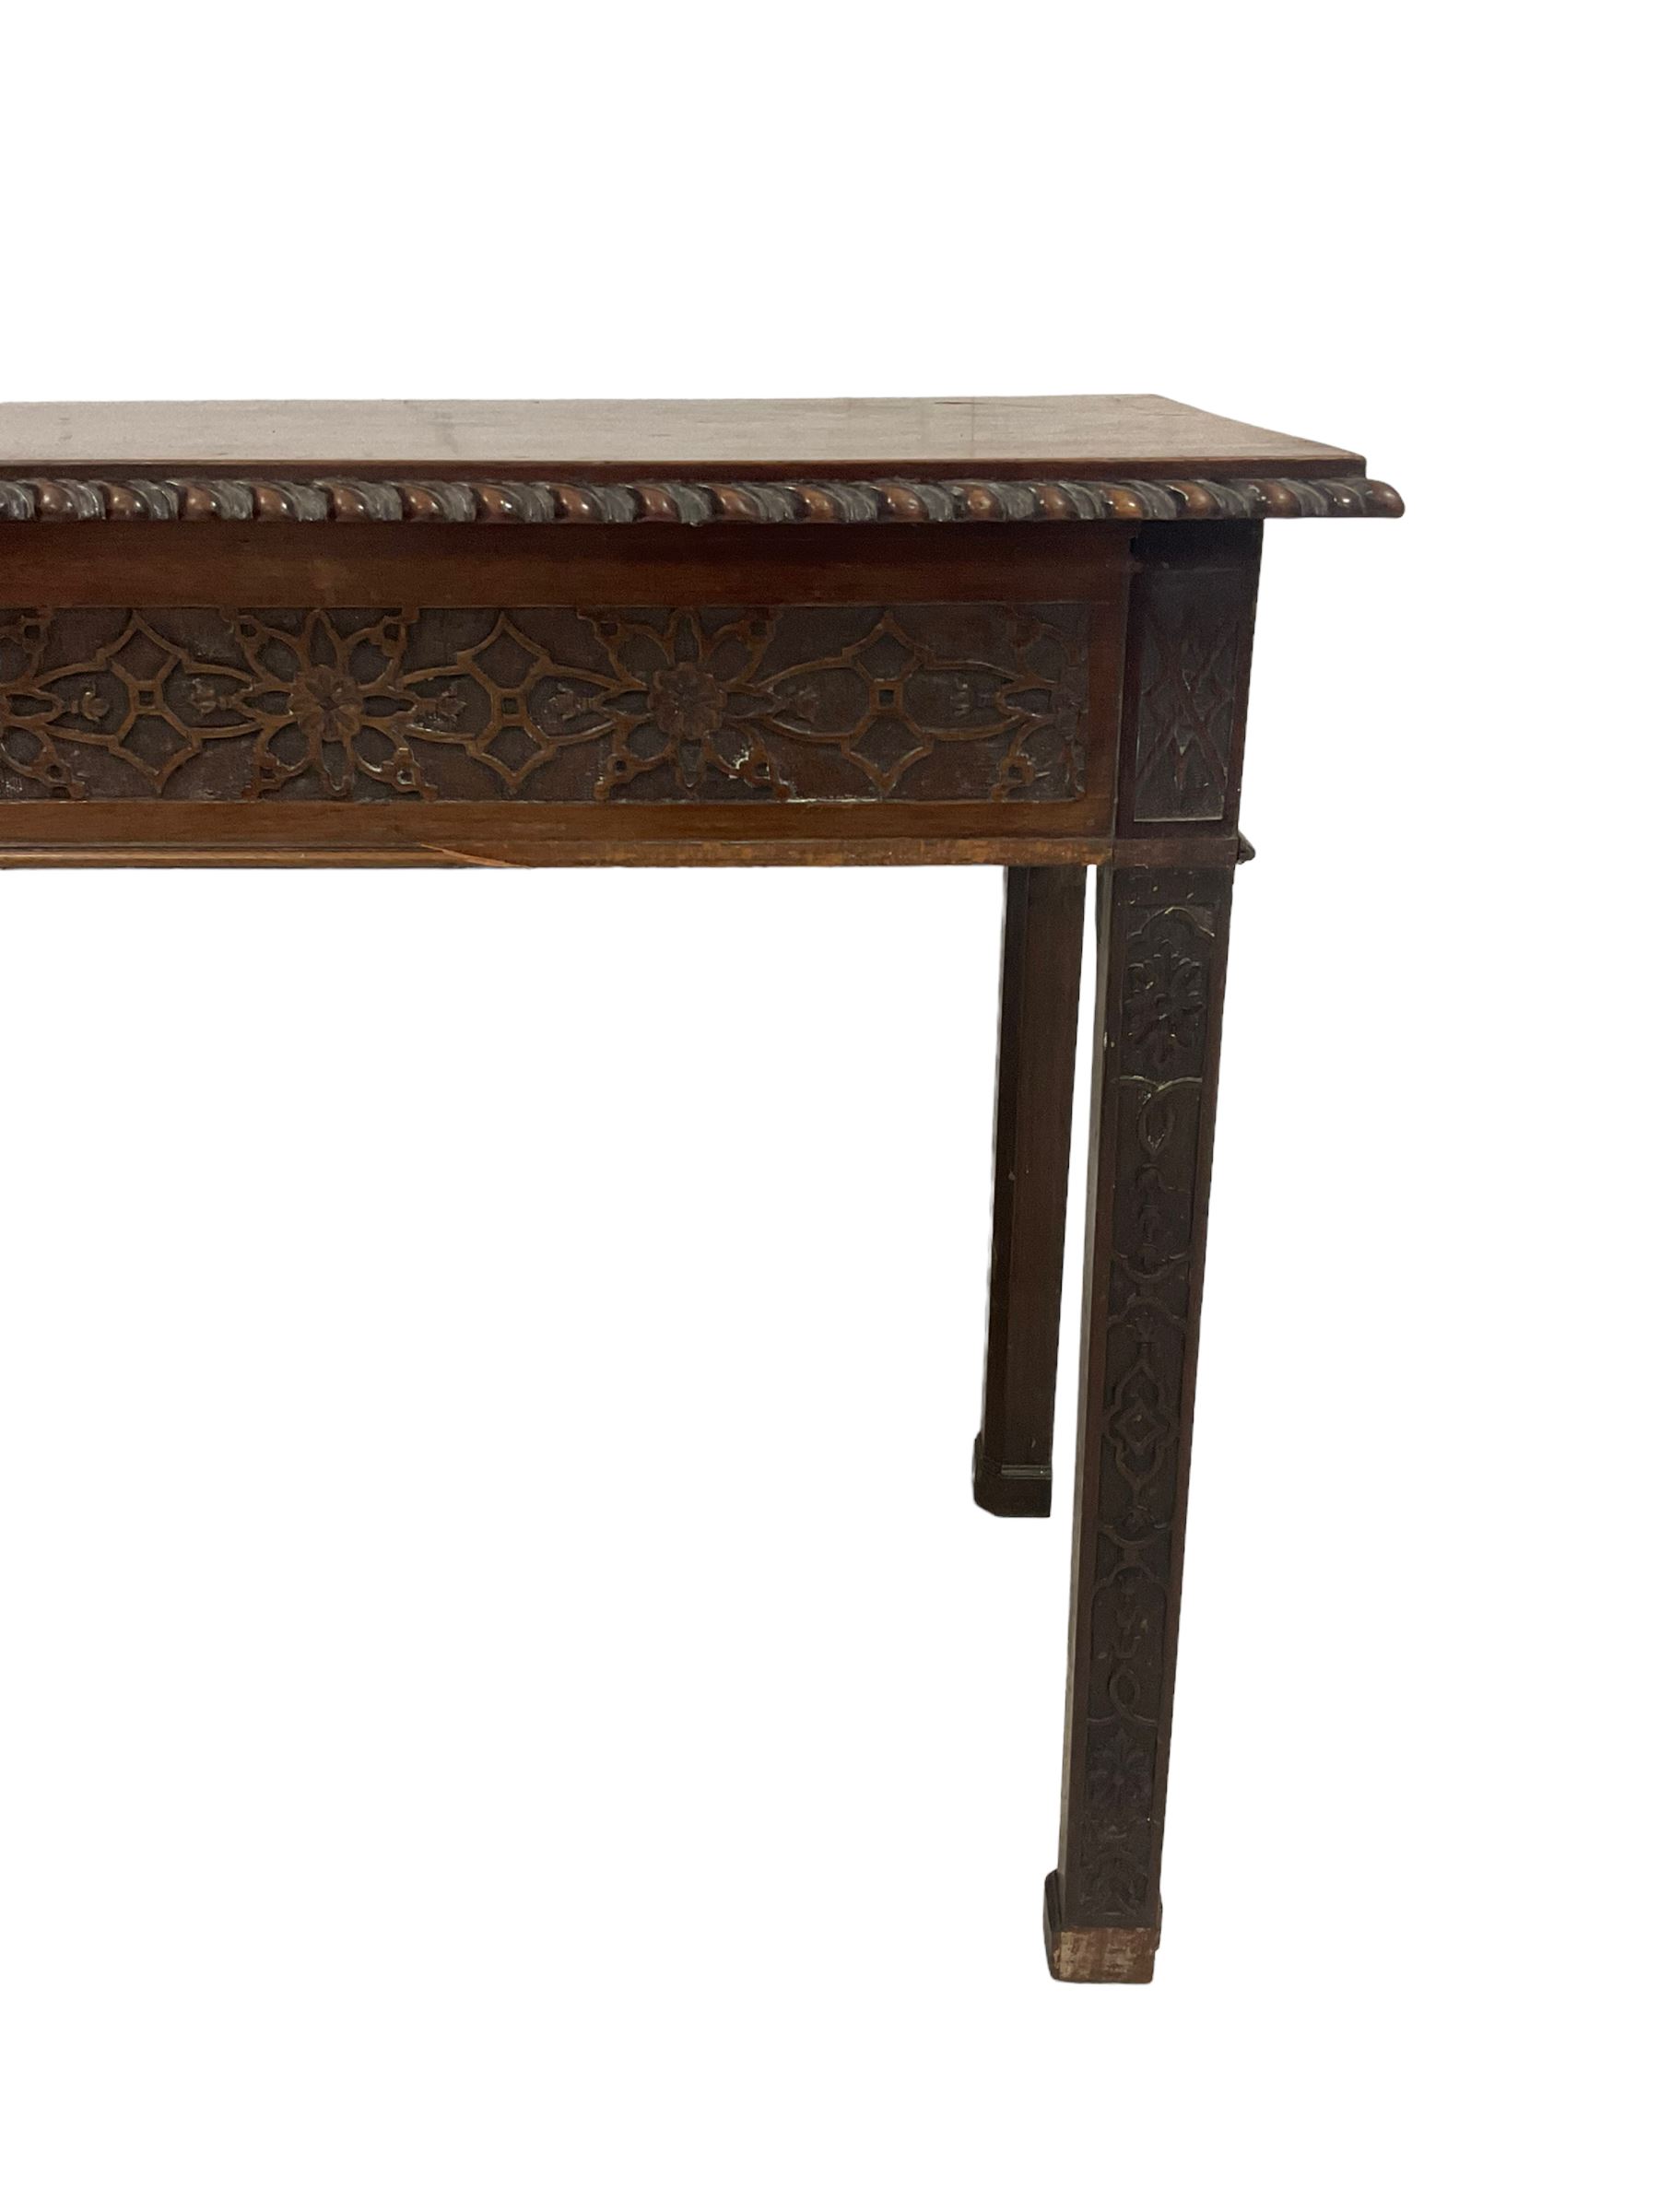 George III Chippendale design mahogany side table - Image 5 of 9